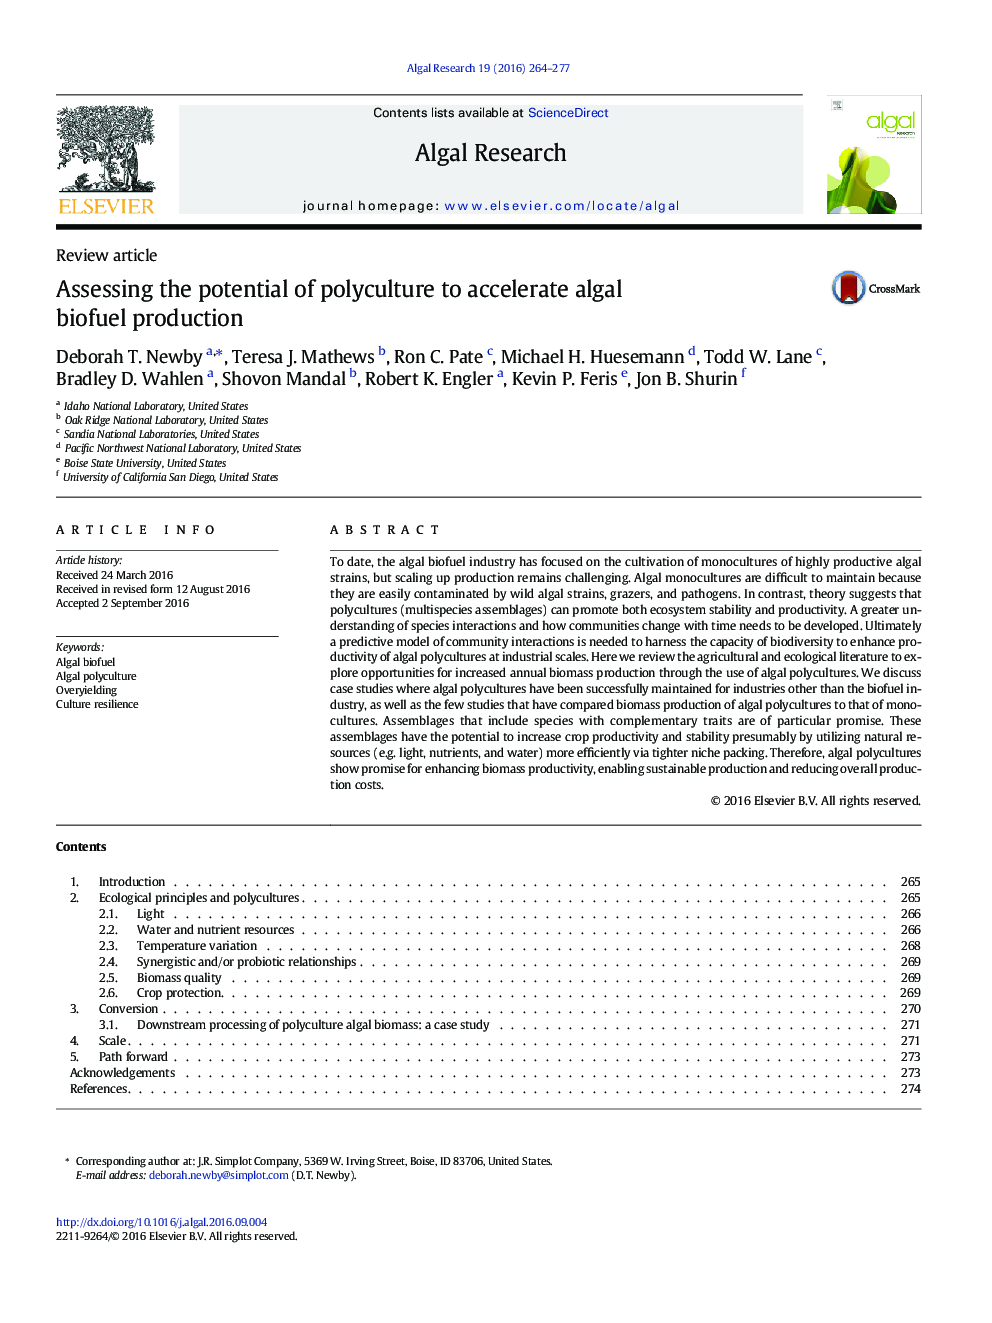 Assessing the potential of polyculture to accelerate algal biofuel production